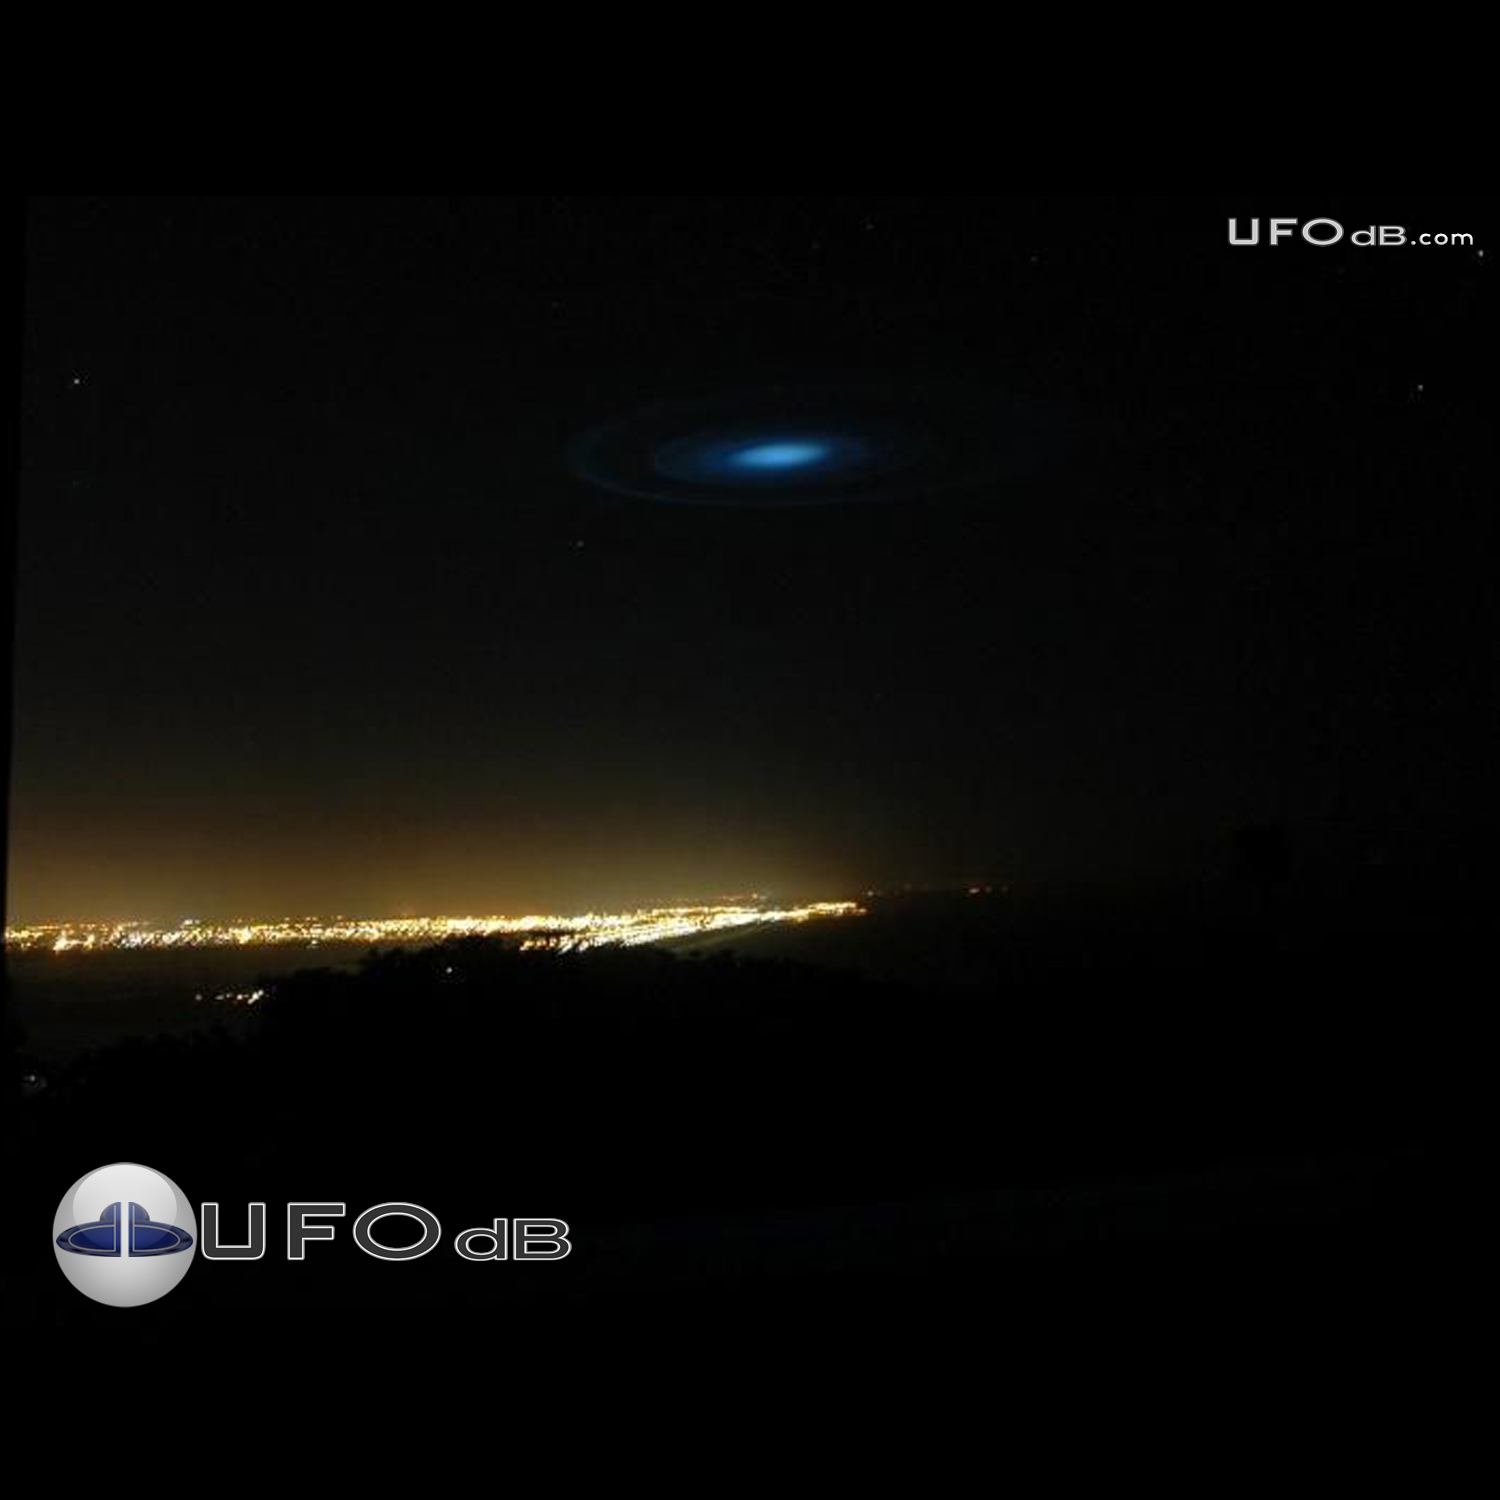 Christchurch New Zealand | Blue Glowing UFO on Picture | March 29 2011 UFO Picture #302-1